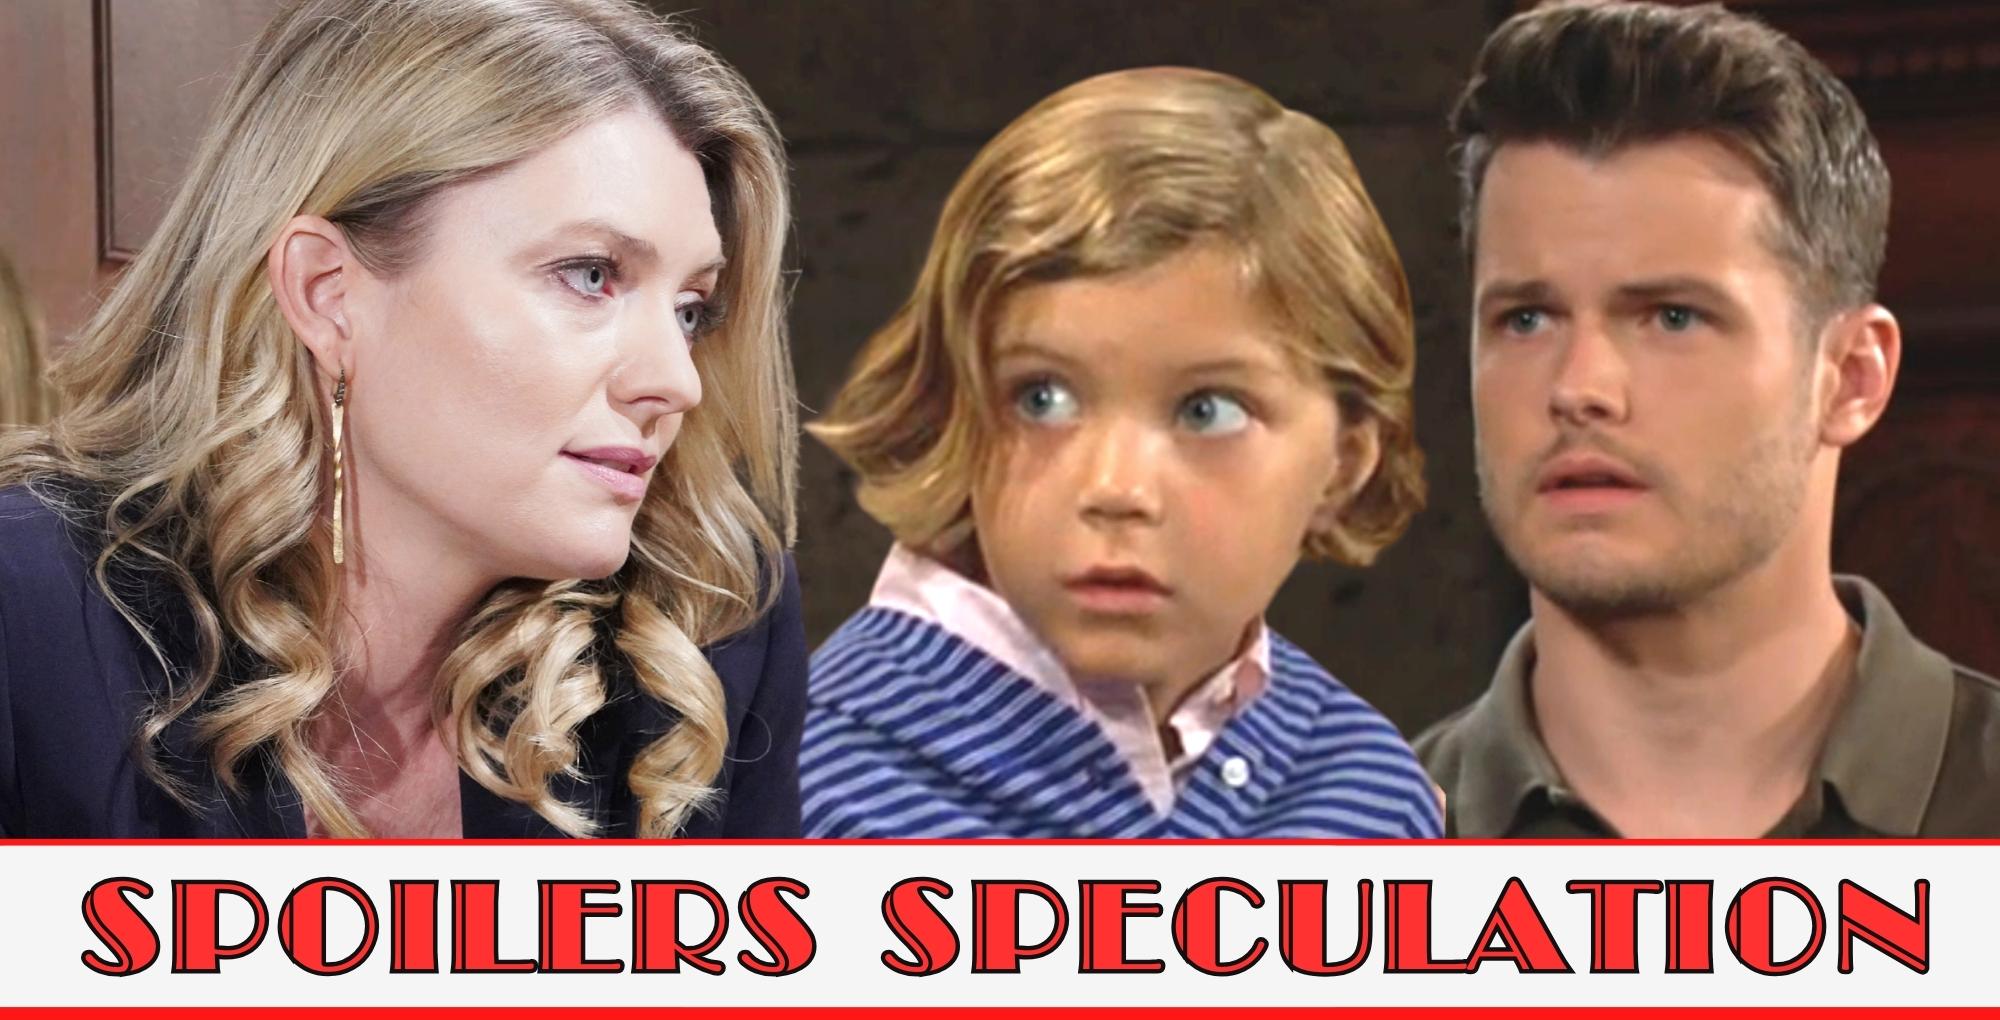 y&r spoilers speculation banner with tara, harrison, and kyle.